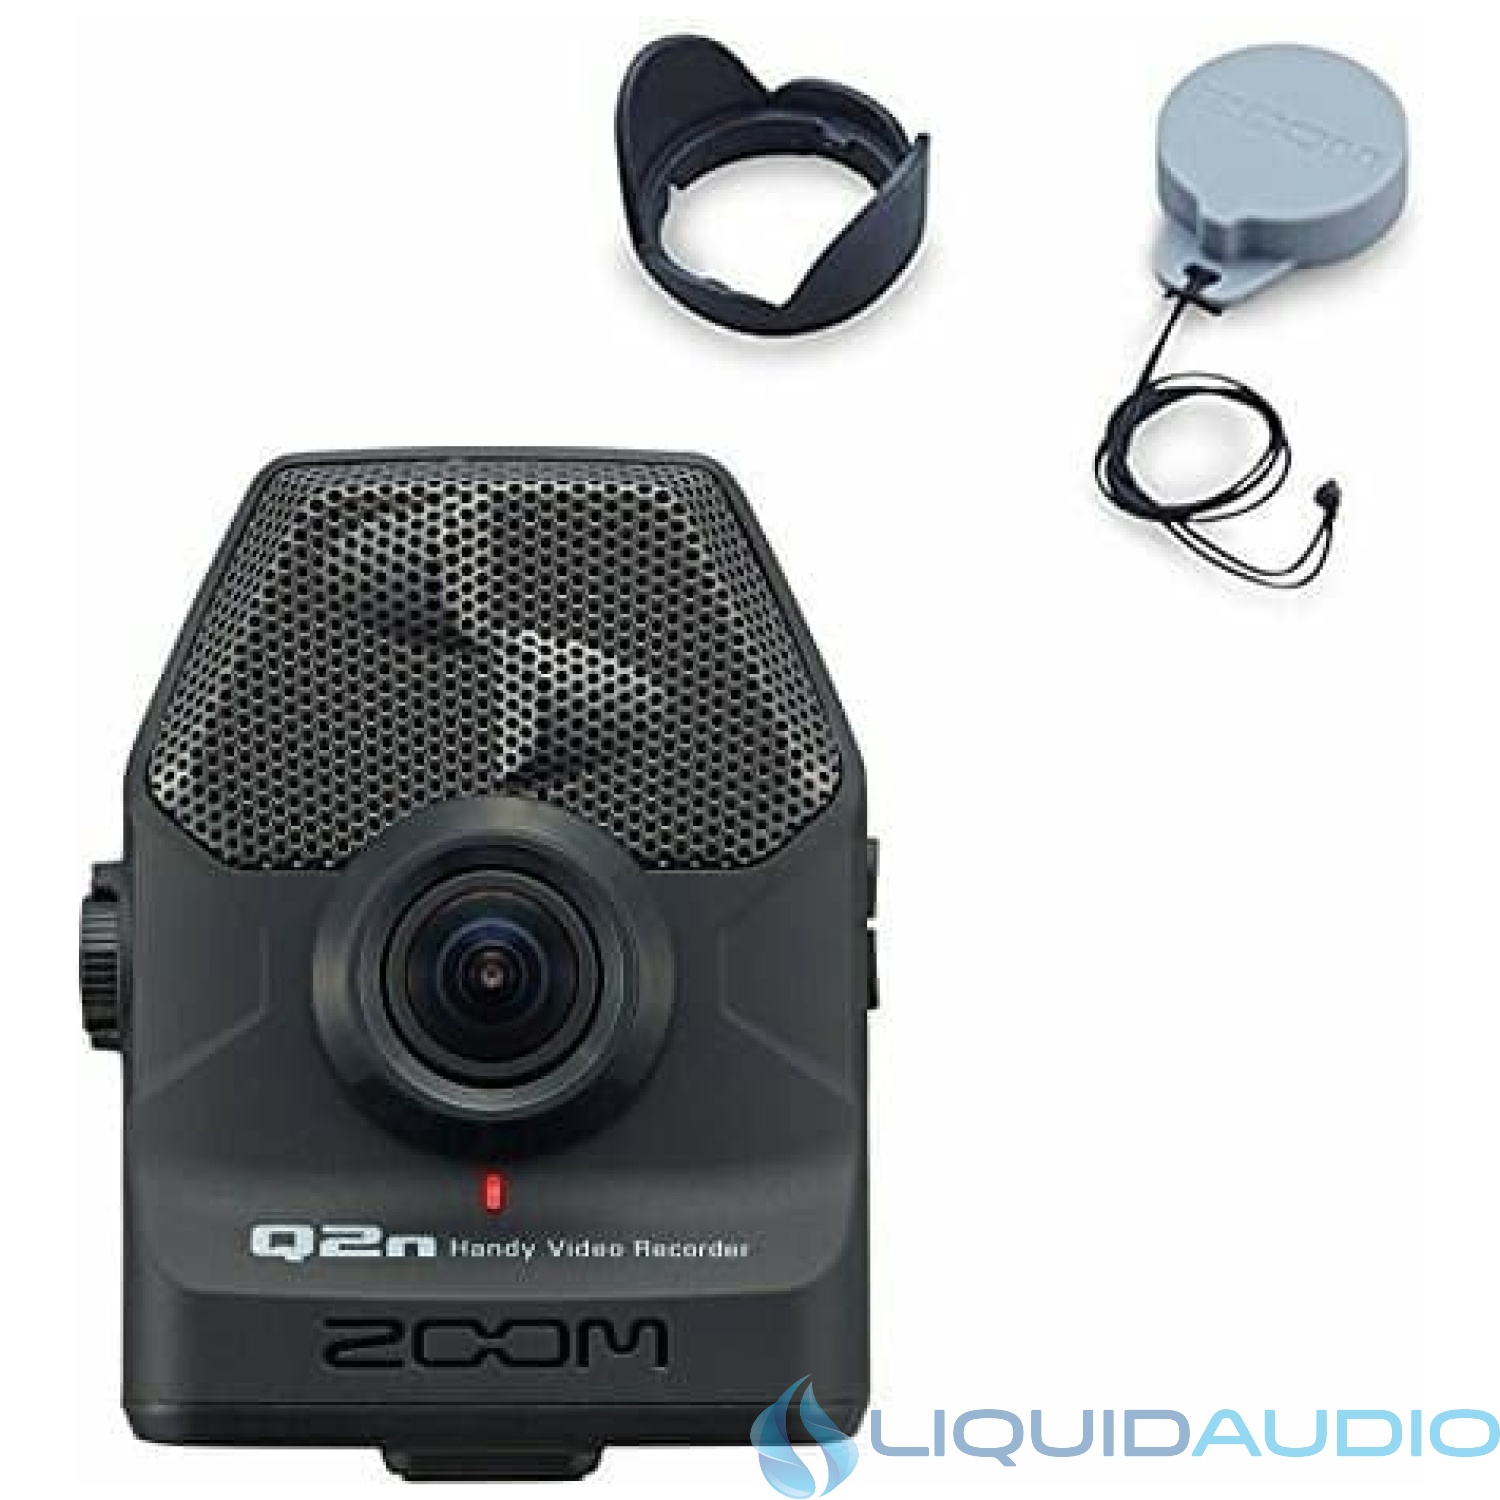 Zoom Q2n Zoom Handy Video Recorder + Zoom LHQ-2n Lens Hood and Cover Accessory Pack for Zoom Q2n